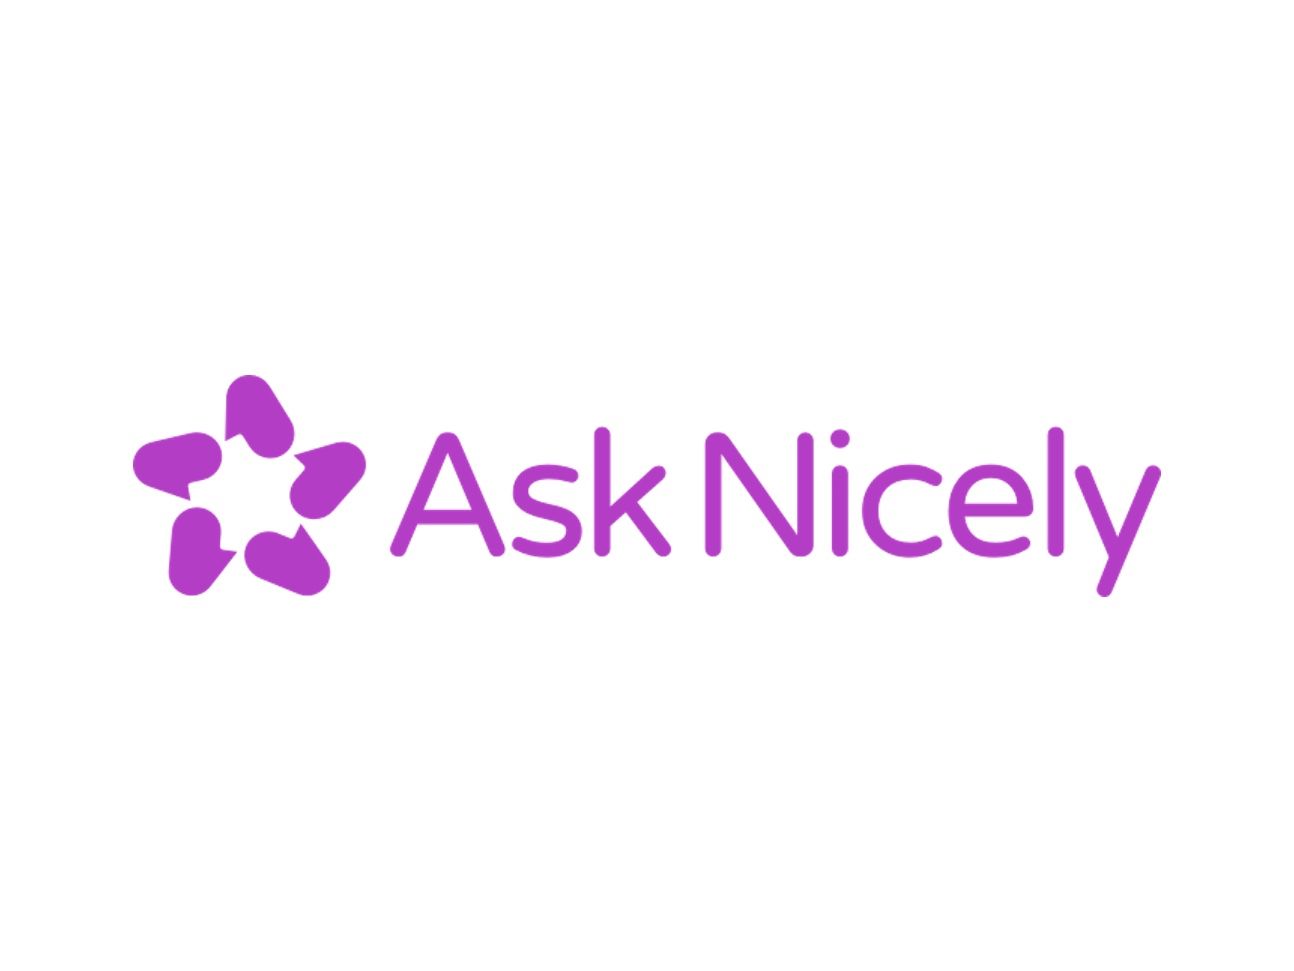 Get instant feedback with AskNicely